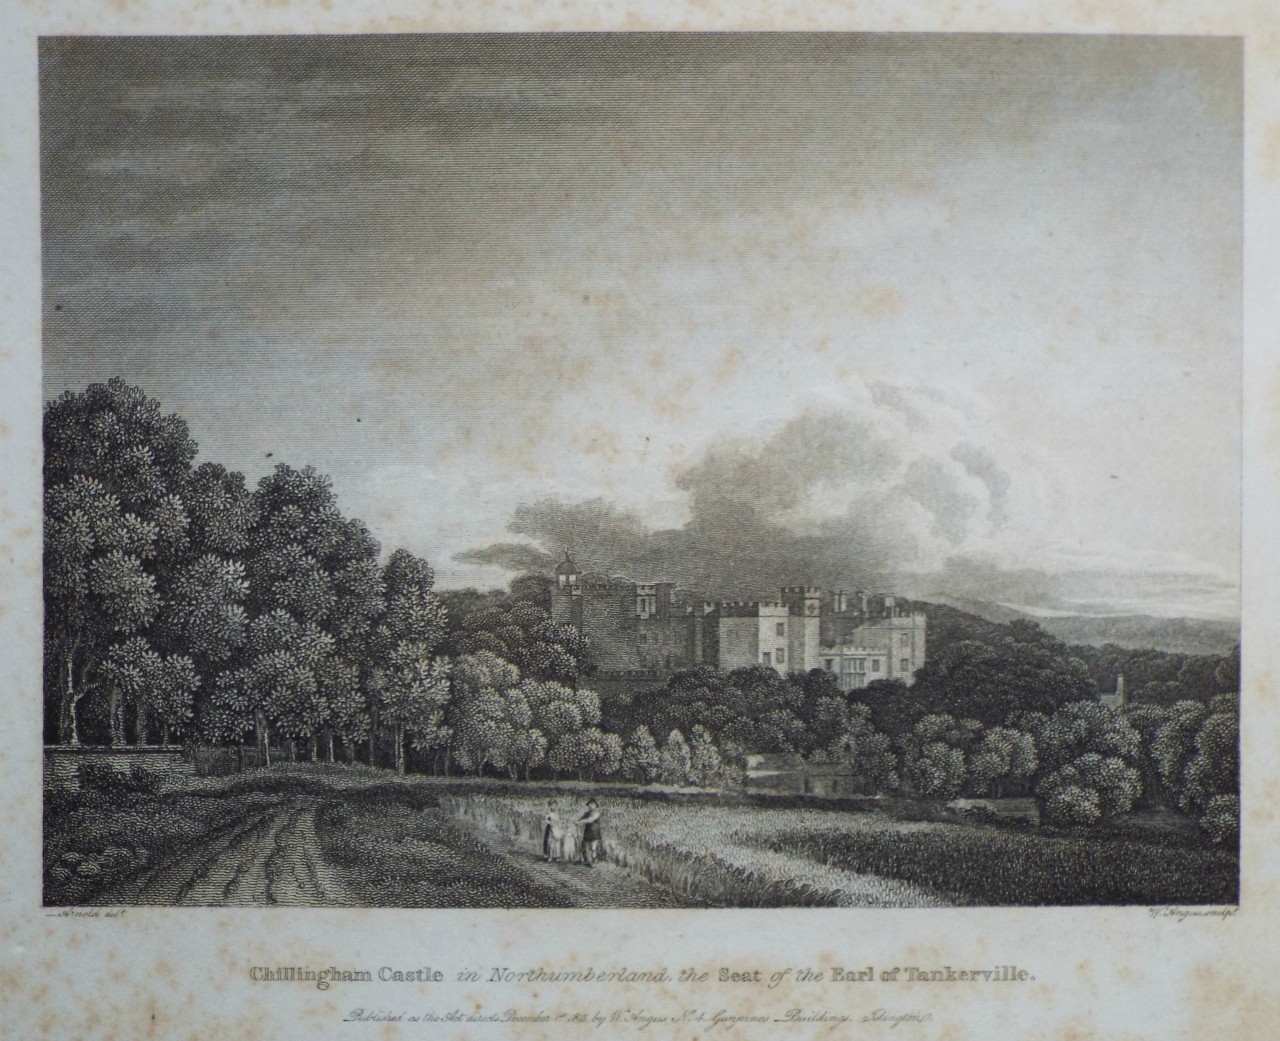 Print - Chillingham Castle in Northumberland, the Seat of the Earl of Tankerville. - Angus